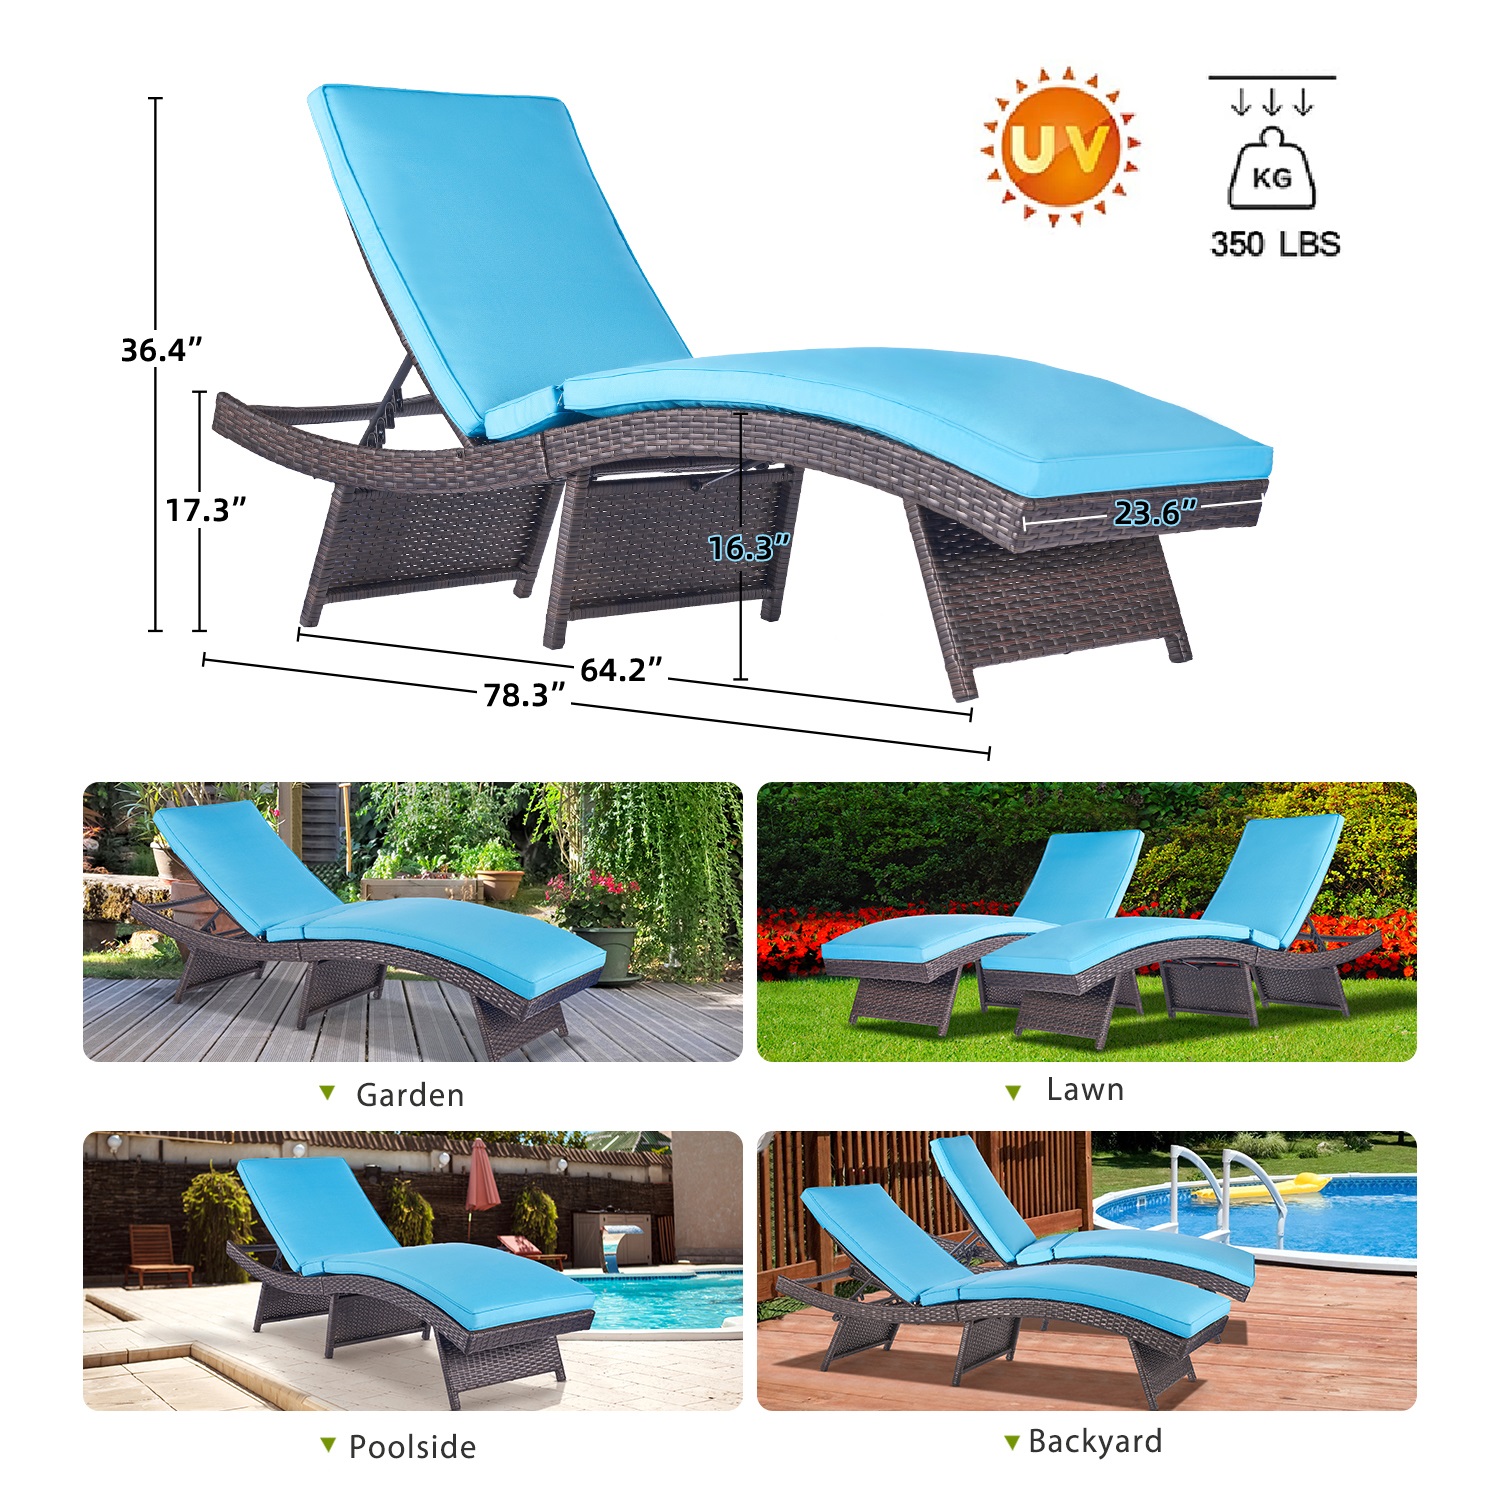 Folding Patio Wicker Chaise Lounge Chairs for Outside Set of 2 Rattan Sunbathing Chaise Lounge Chair Outdoor Assembled Reclining Sunbed Cushion Blue S Type Adjustable Backrest, No Assembly Required - image 5 of 7